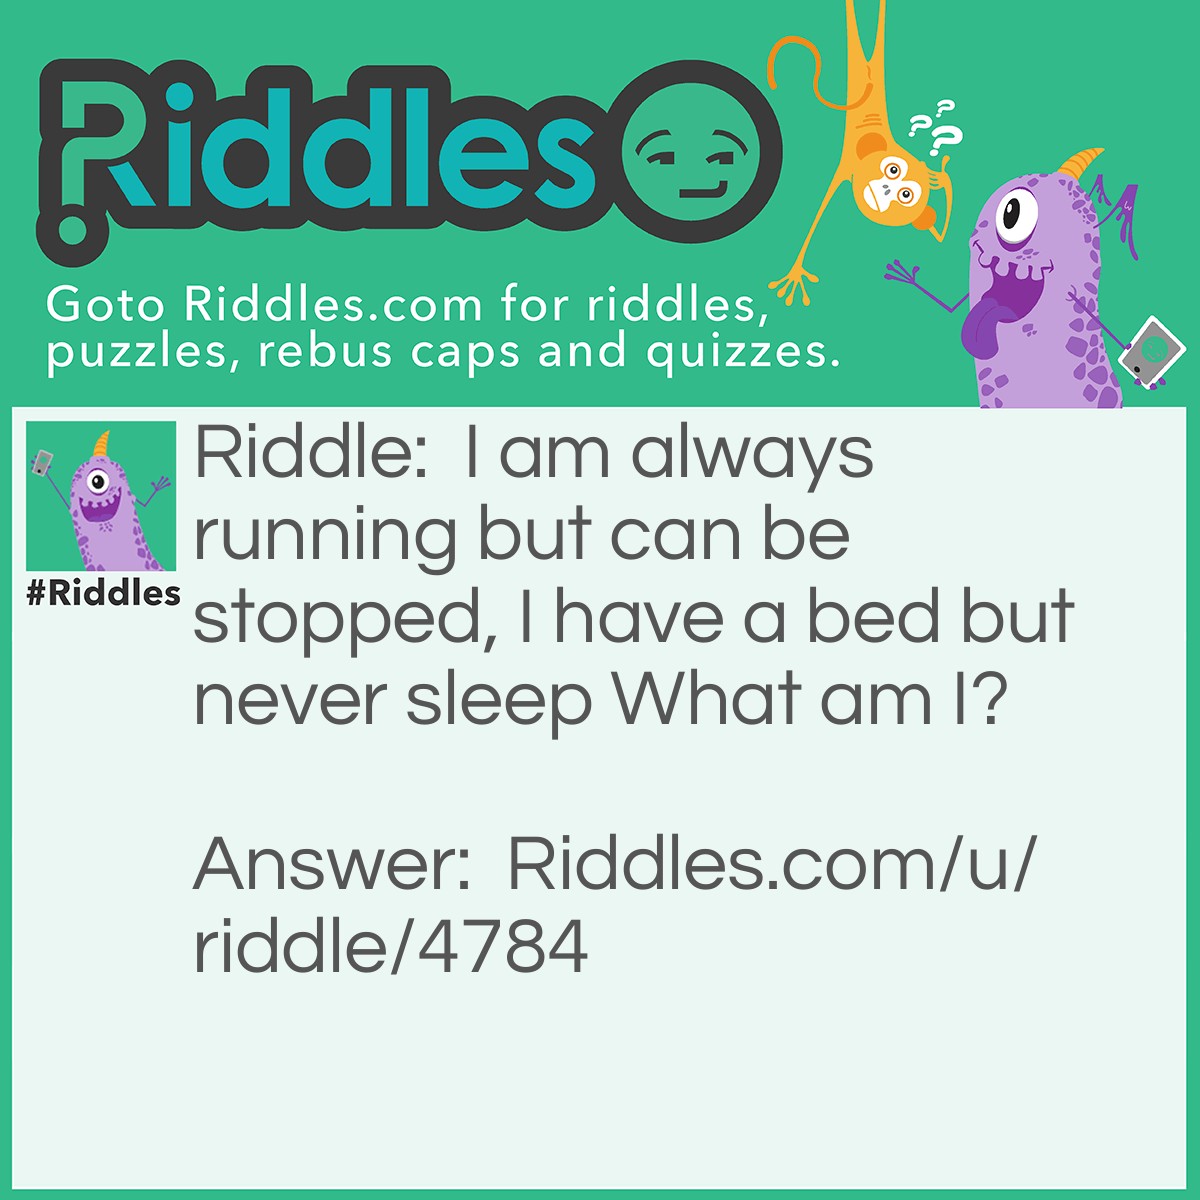 Riddle: I am always running but can be stopped, I have a bed but never sleep What am I? Answer: A river.